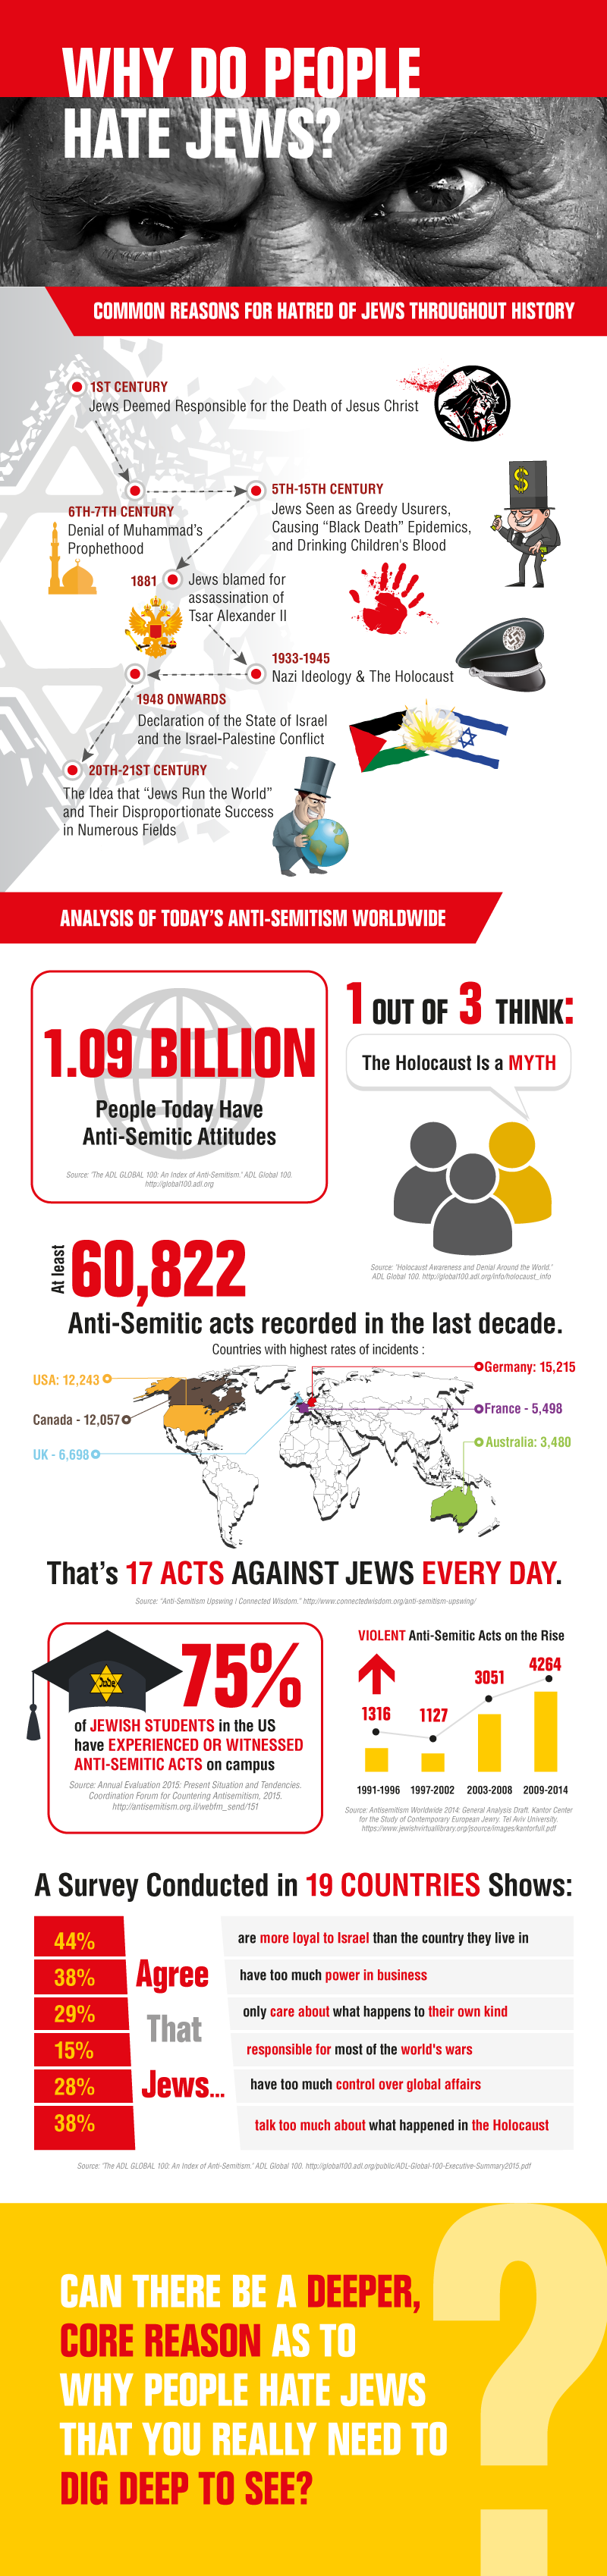 https://www.kabbalah.info/bb/wp-content/uploads/2016/02/Why-Do-People-Hate-Jews-Infographic_800x3397.png